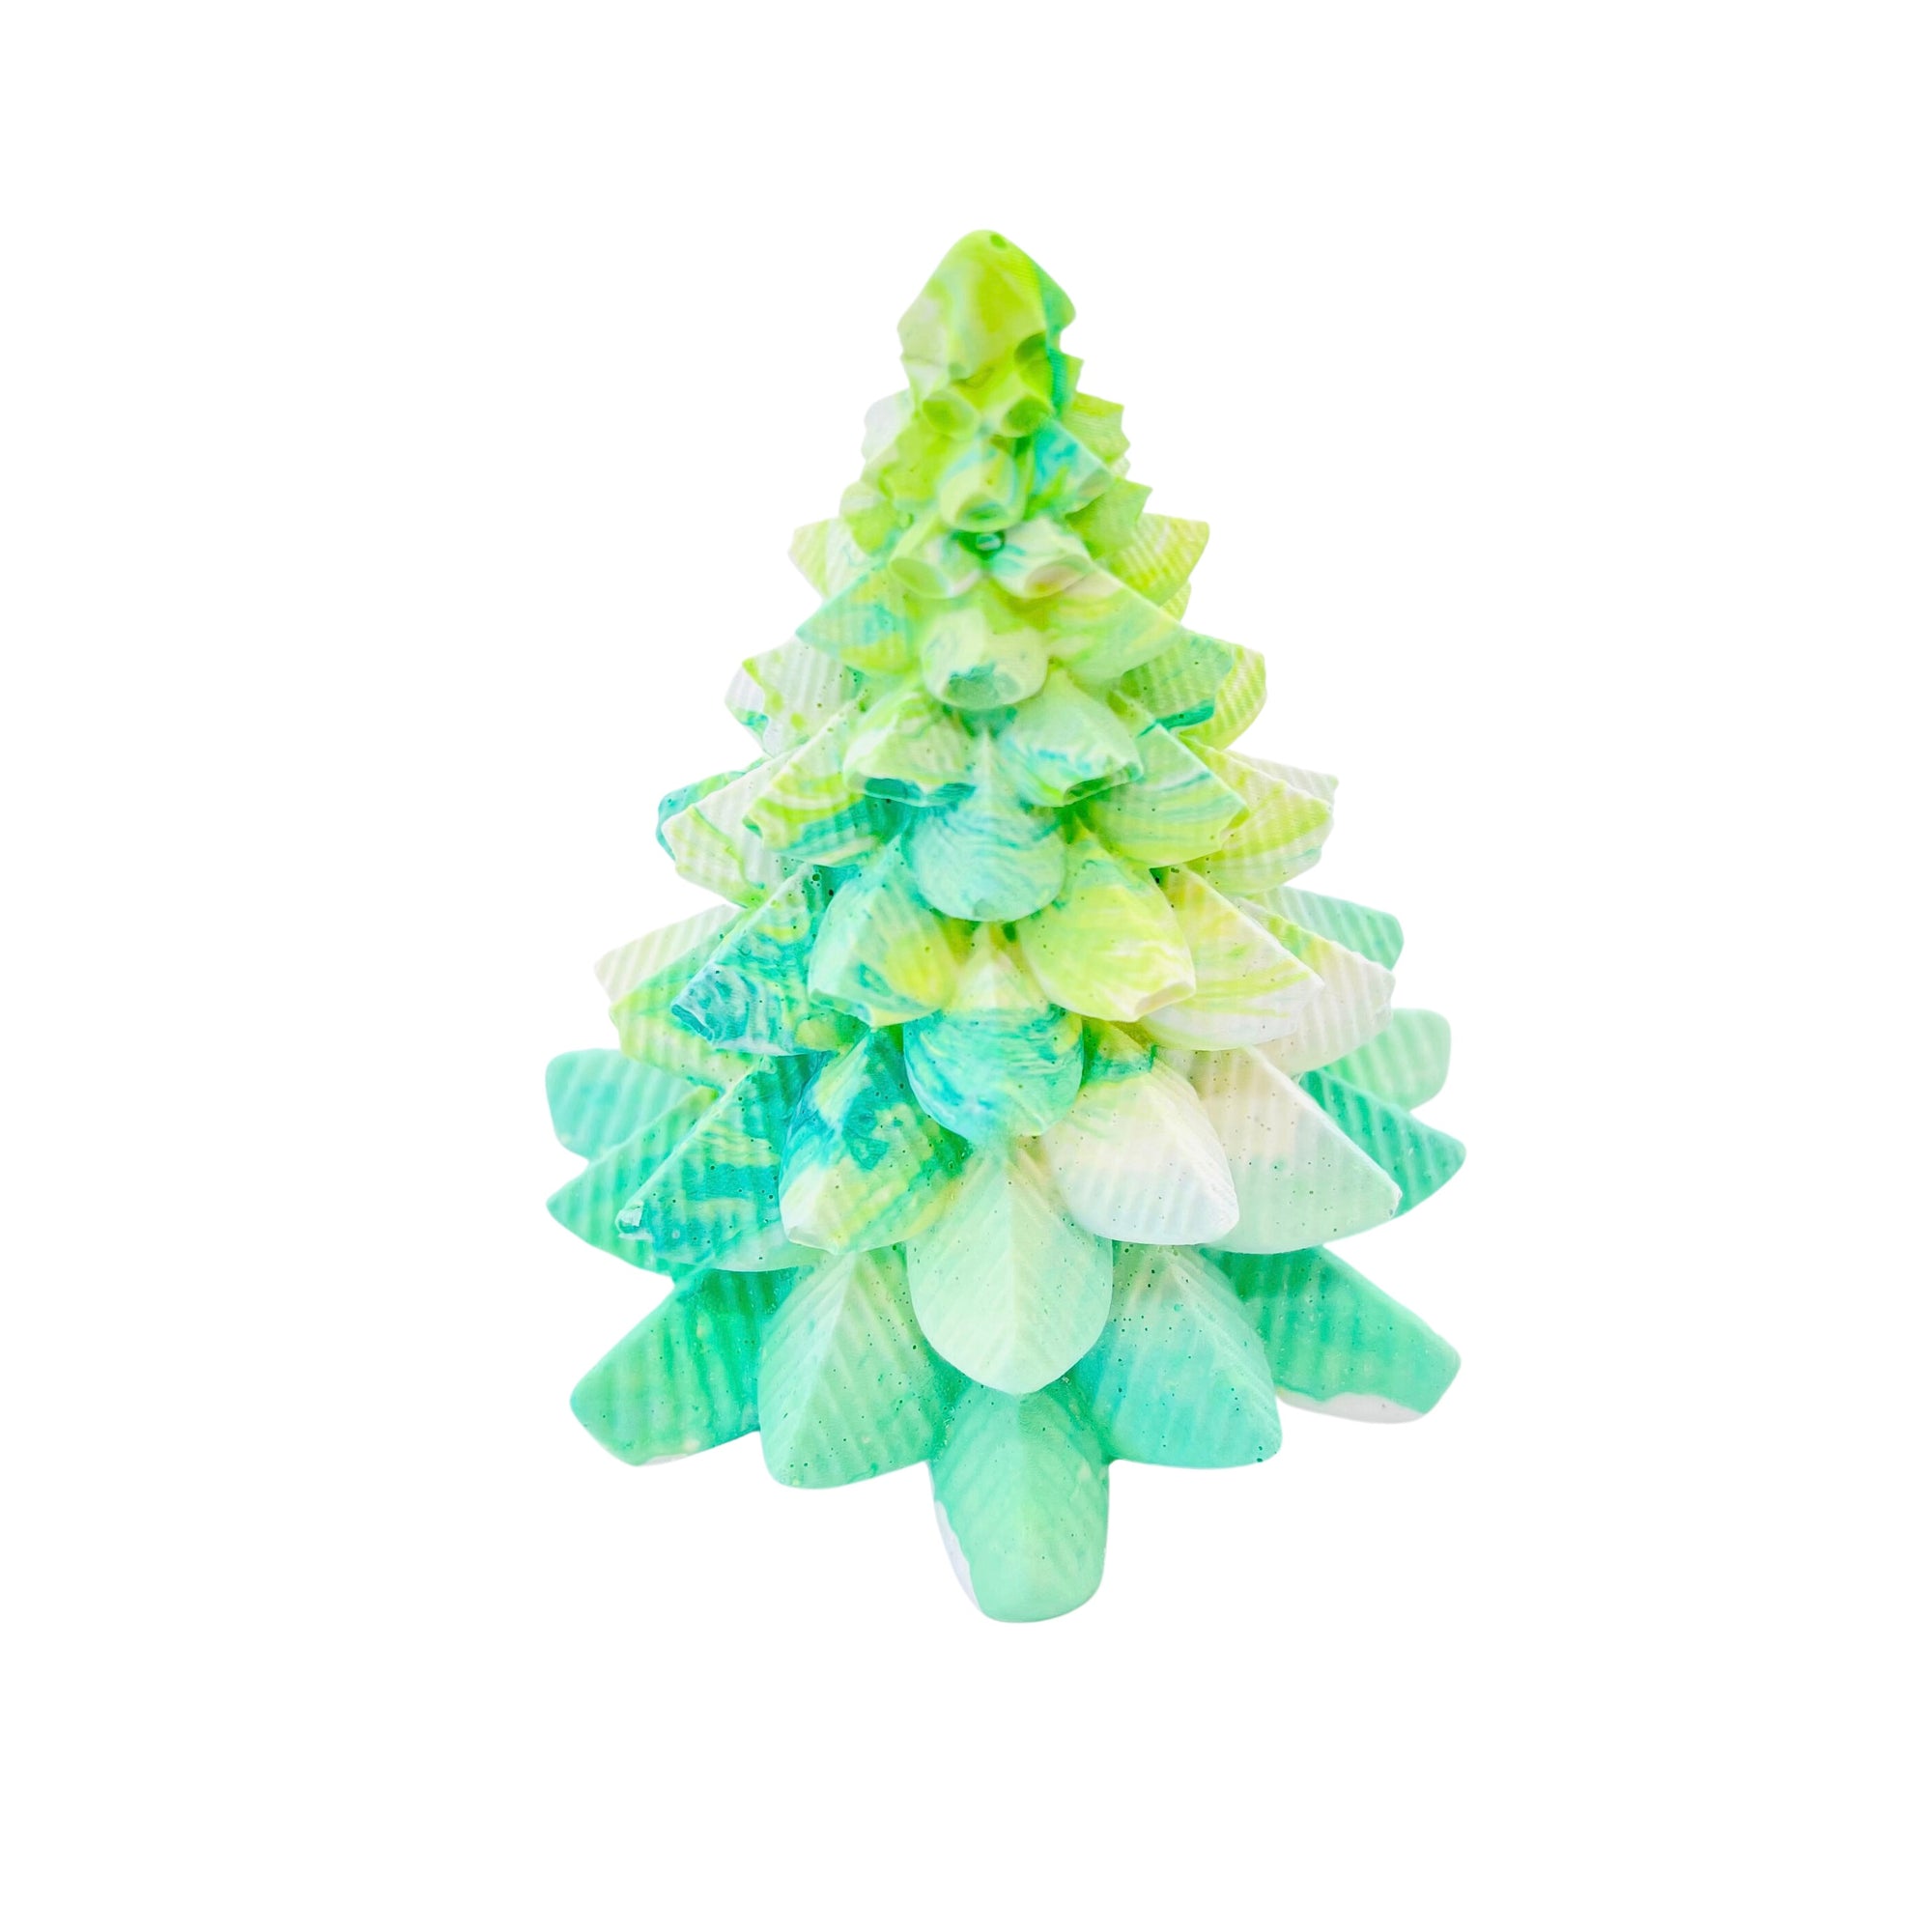 A small Jesmonite Christmas tree measuring 8.5cm tall and 7.5cm wide marbled with turquoise and lime green pigment.